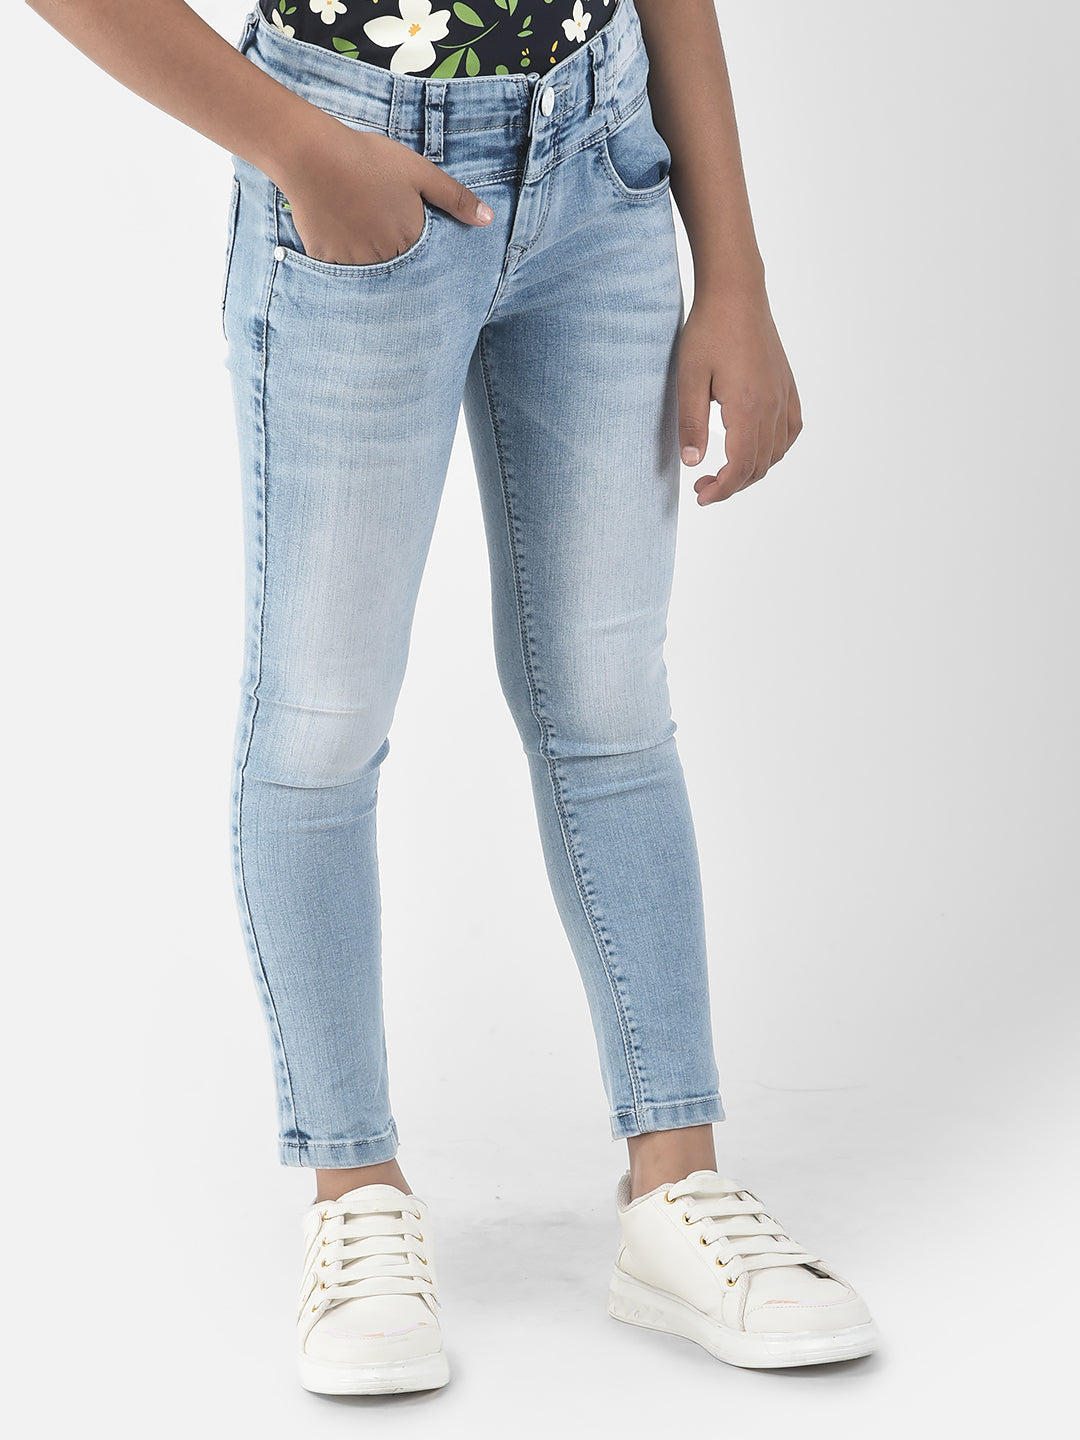  Blue High-Rise Jeans